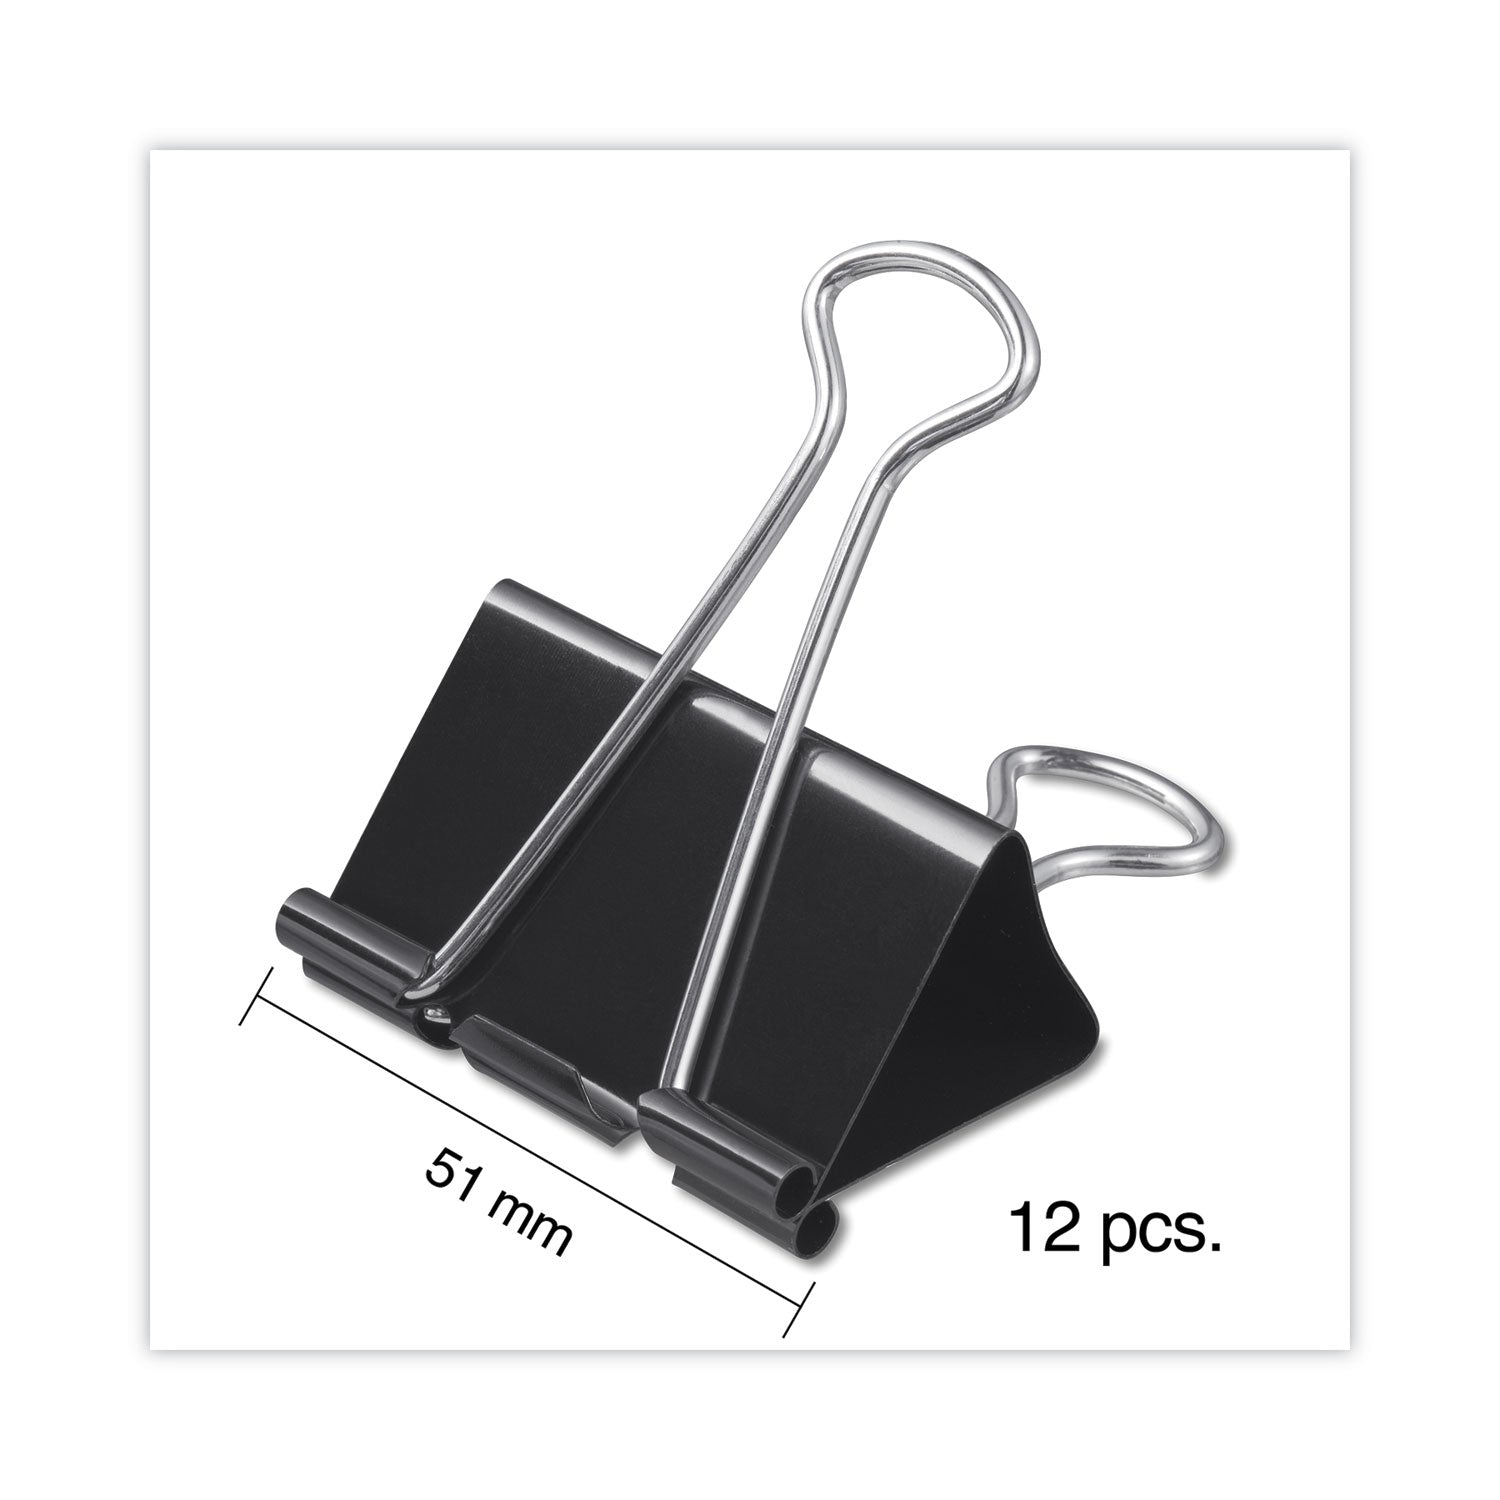 binder-clips-with-storage-tub-large-black-silver-12-pack_unv11112 - 4